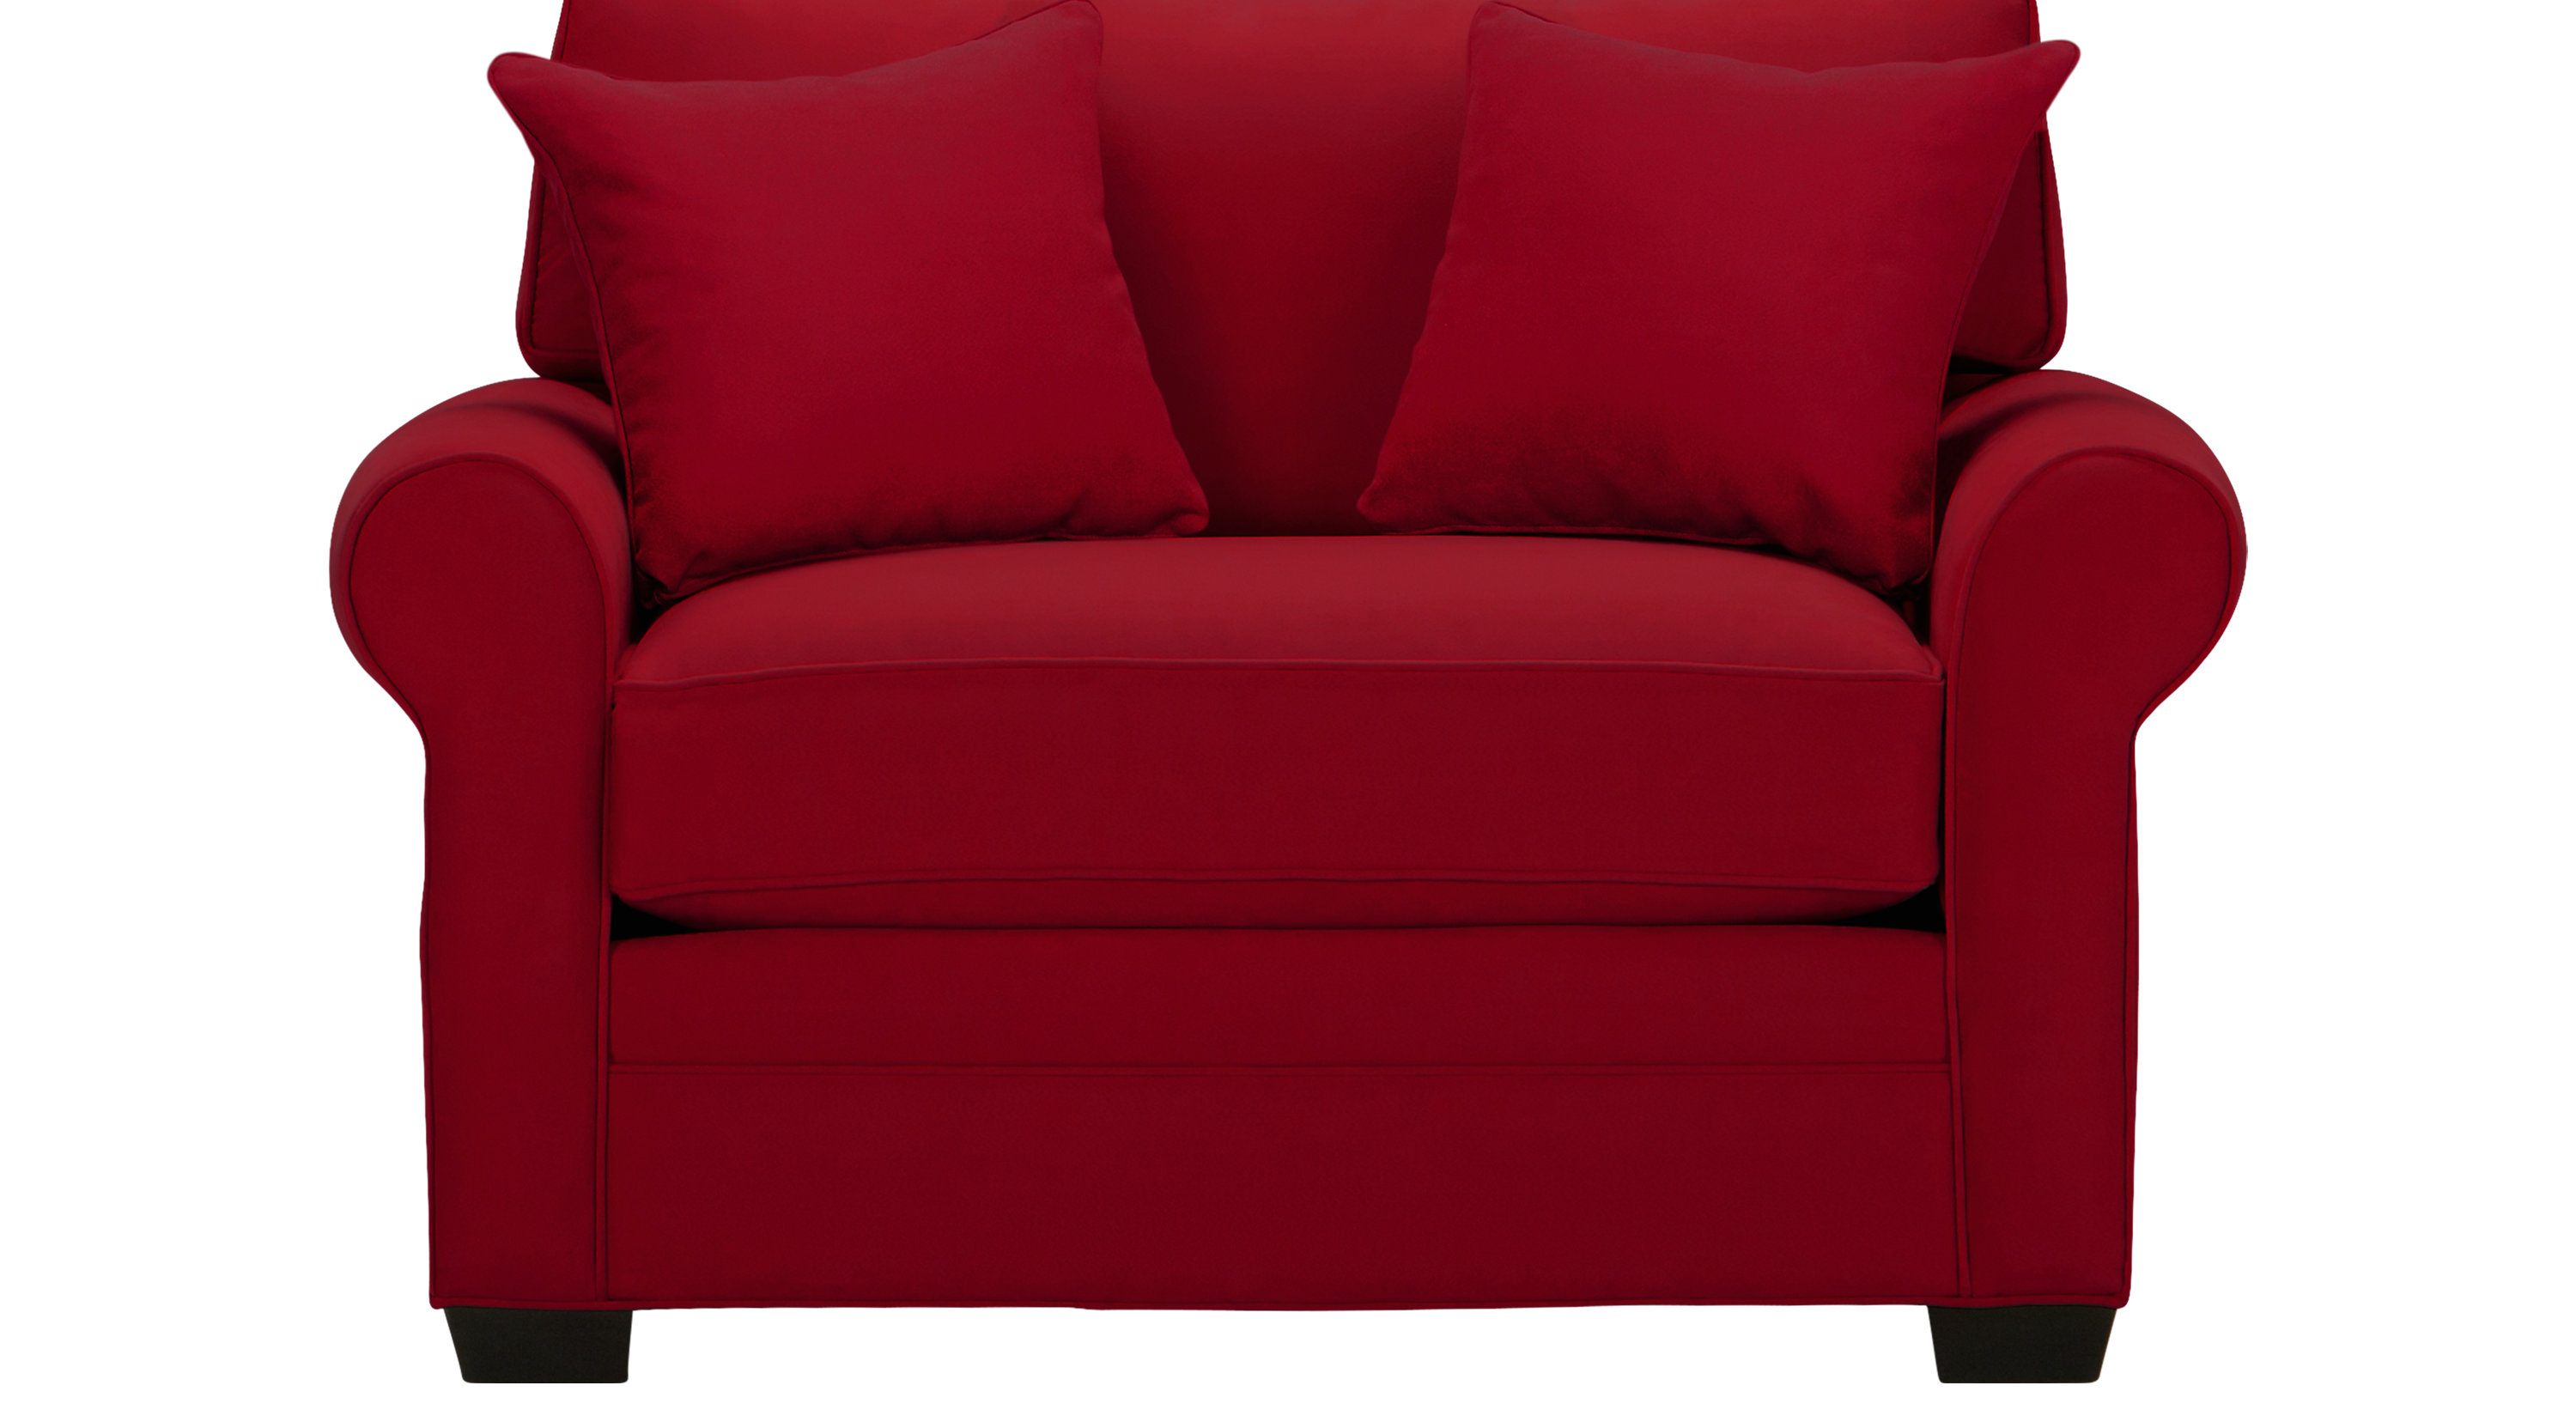 $555.00 - Bellingham Cardinal (red) Chair - Oversized - Contemporary